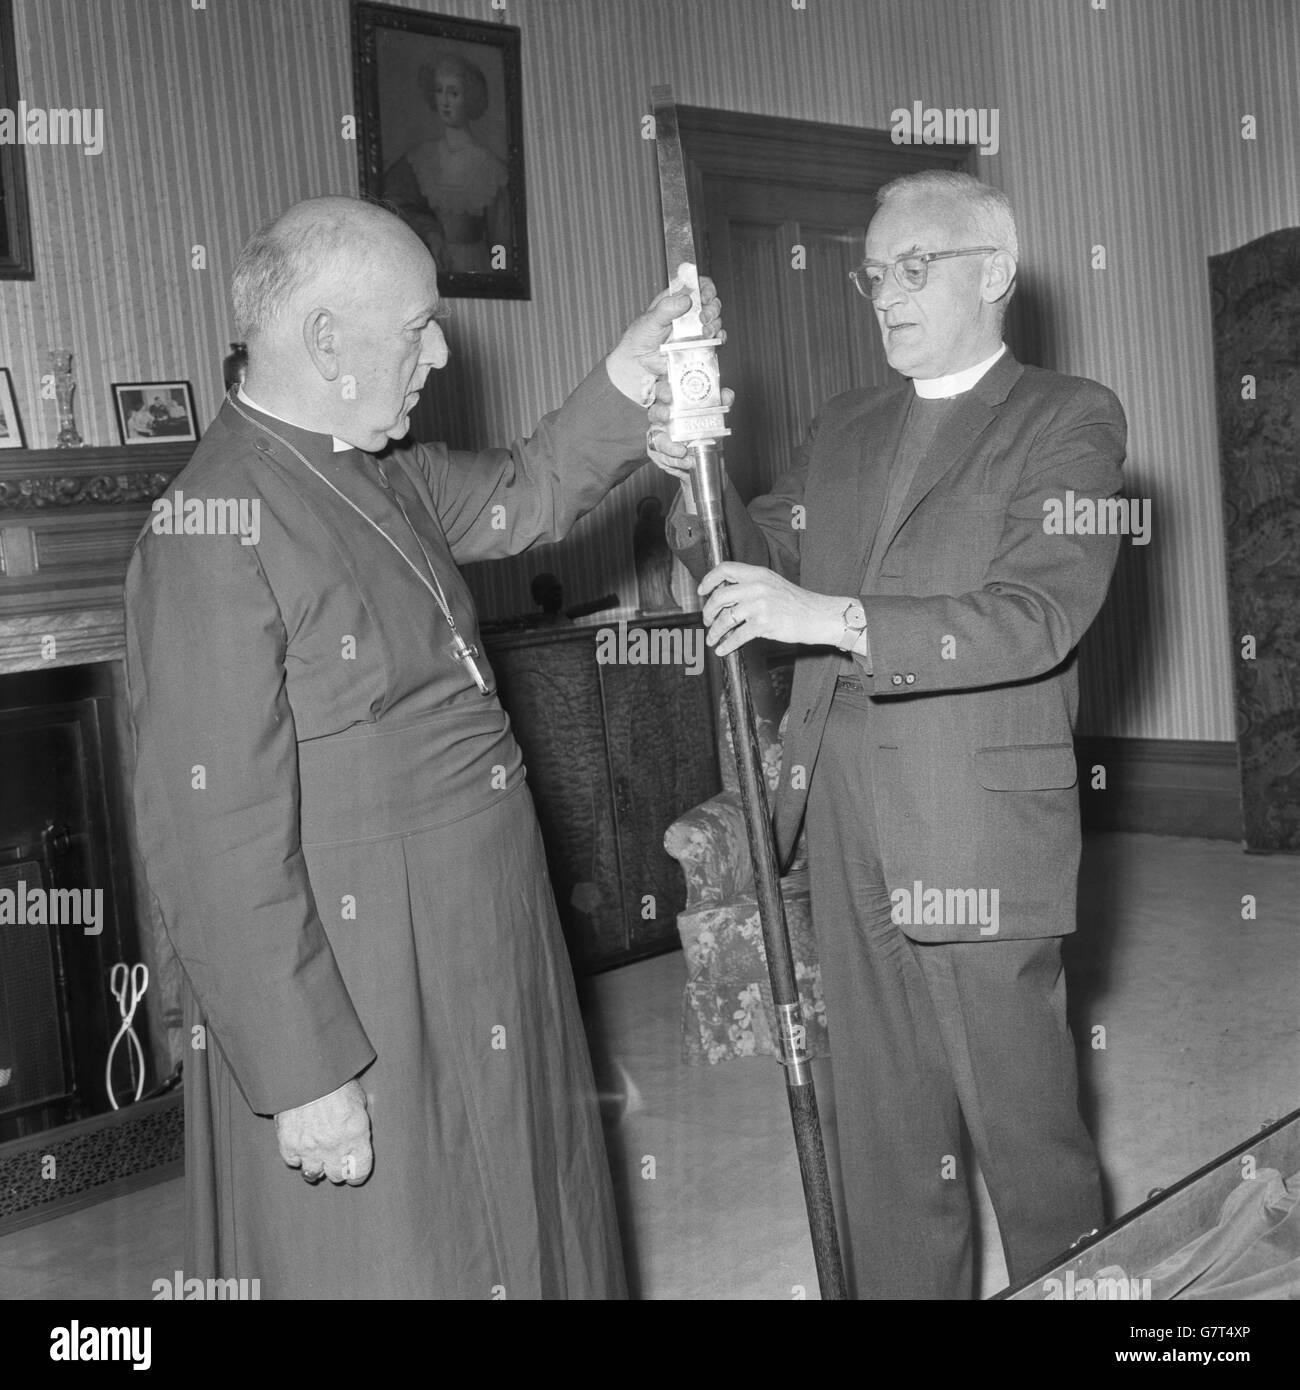 Anglican Executive Officer, Bishop Stephen F. Bayne (r) presents at Lambeth Palace, London, a fine silver crosier to the Archbishop of Canterbury, Dr. Geoffrey Fisher, as a gift, on the occasion of his approaching retirement, from the 33 bishops and archbishops who are his fellow Metropolitans of the Anglican Communion. The crosier, or shepherd's staff, is the characteristic emblem of a bishop's office, borne by him in procession or as he takes part in the worship and life of the church. Stock Photo